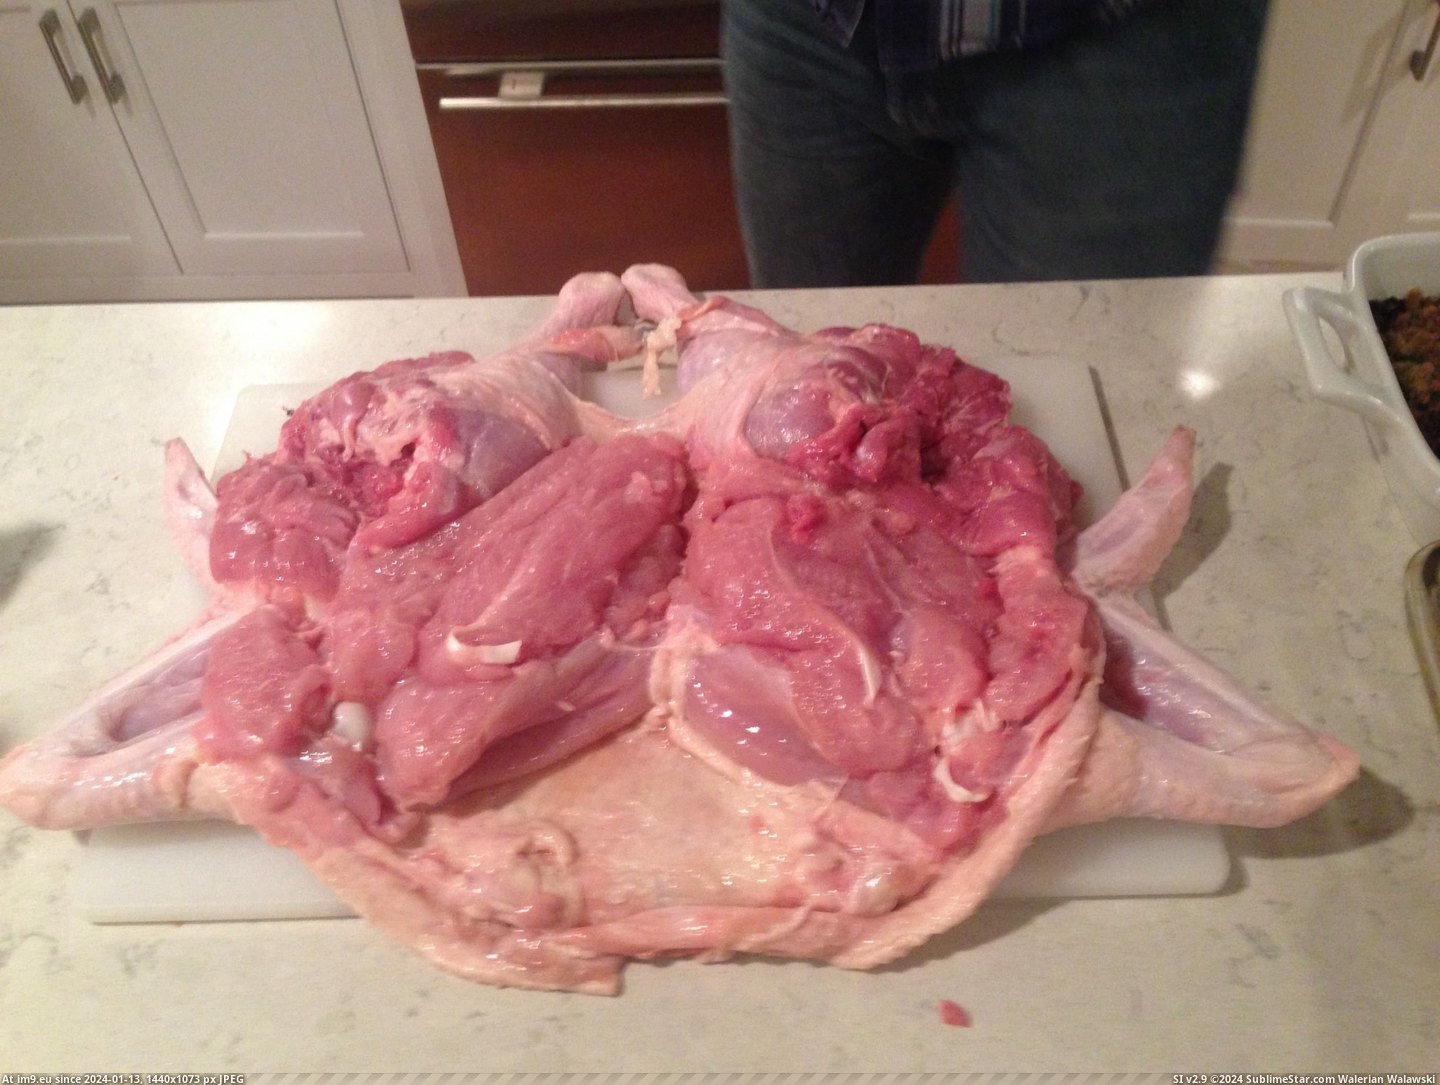 #For #Year #Thought #Thanksgiving #Duck #Turkey #Turducken #Family #See #Chicken [Pics] My family makes turducken (a chicken in a duck in a turkey) every year for Thanksgiving. Thought reddit would like to see Pic. (Bild von album My r/PICS favs))